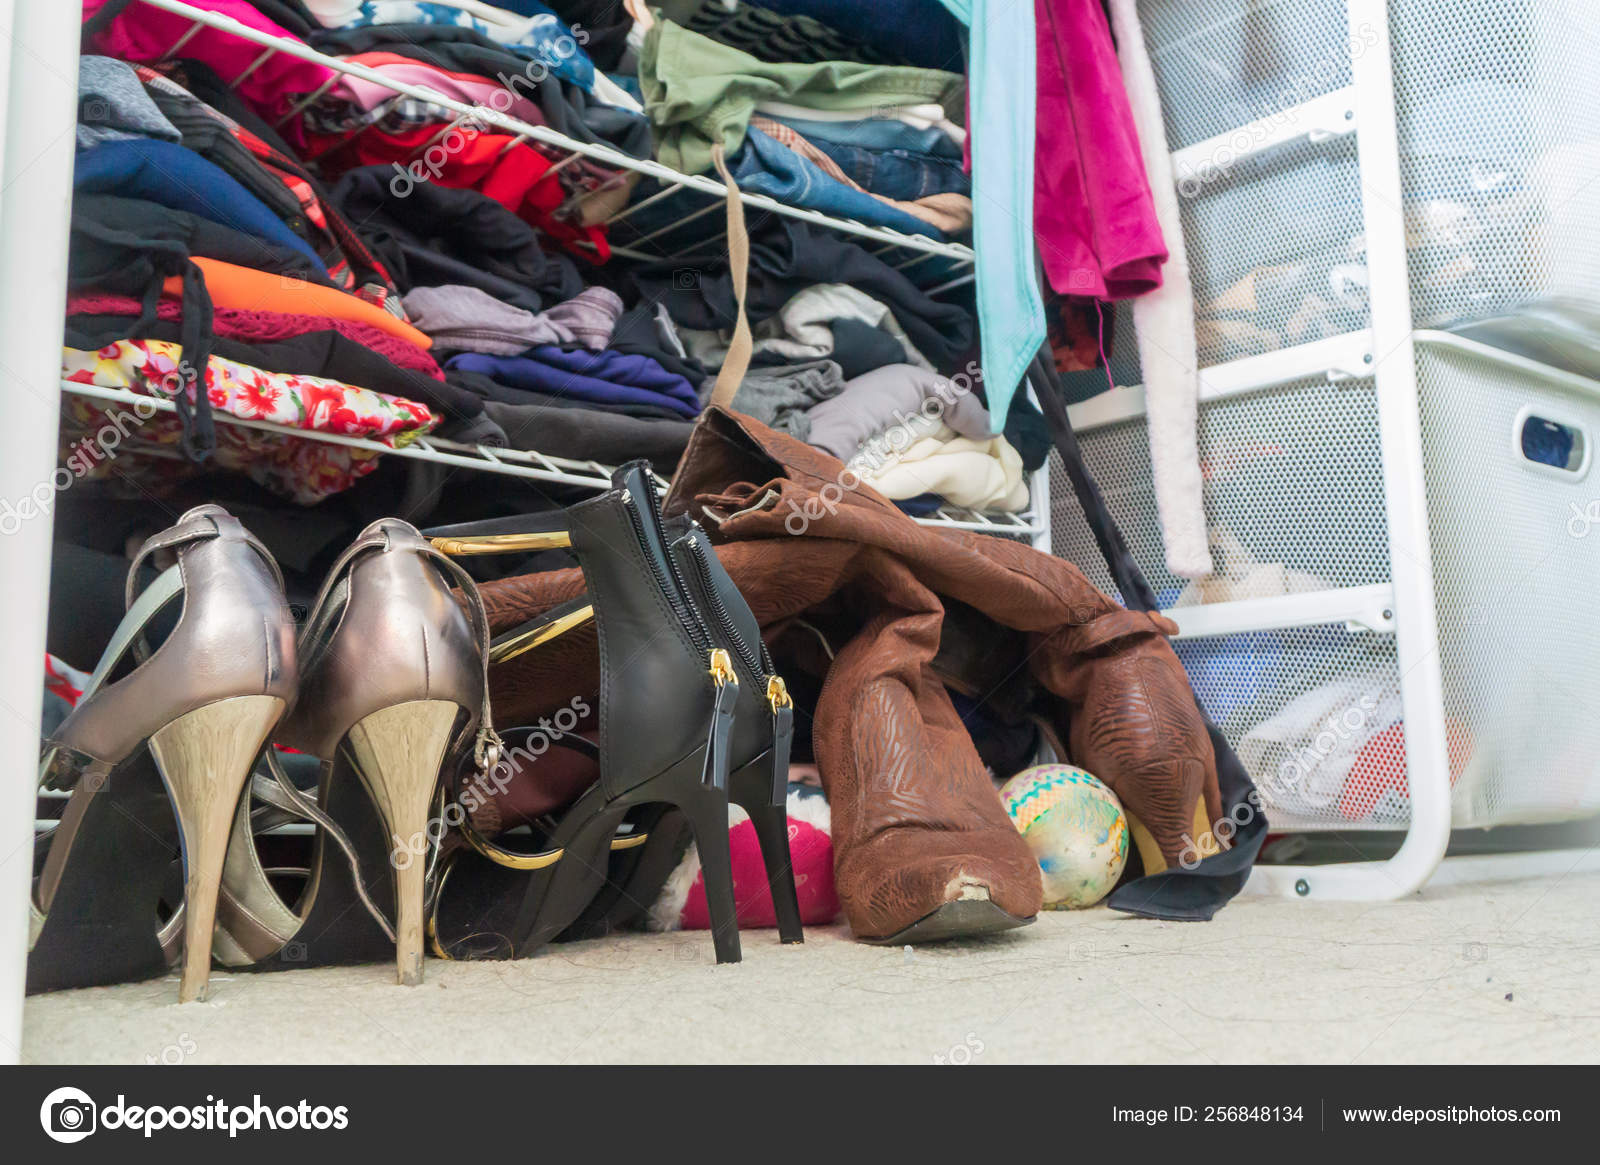 compact Actively batch Woman's closet with high heel shoes, stacked, folded clothes on shelves and  part of robes hanging. Depicting closet organization, time to donate  clothes, fashion lifestyle, consumerism, etc. Stock Photo by  ©thoughtsofjoyce 256848134